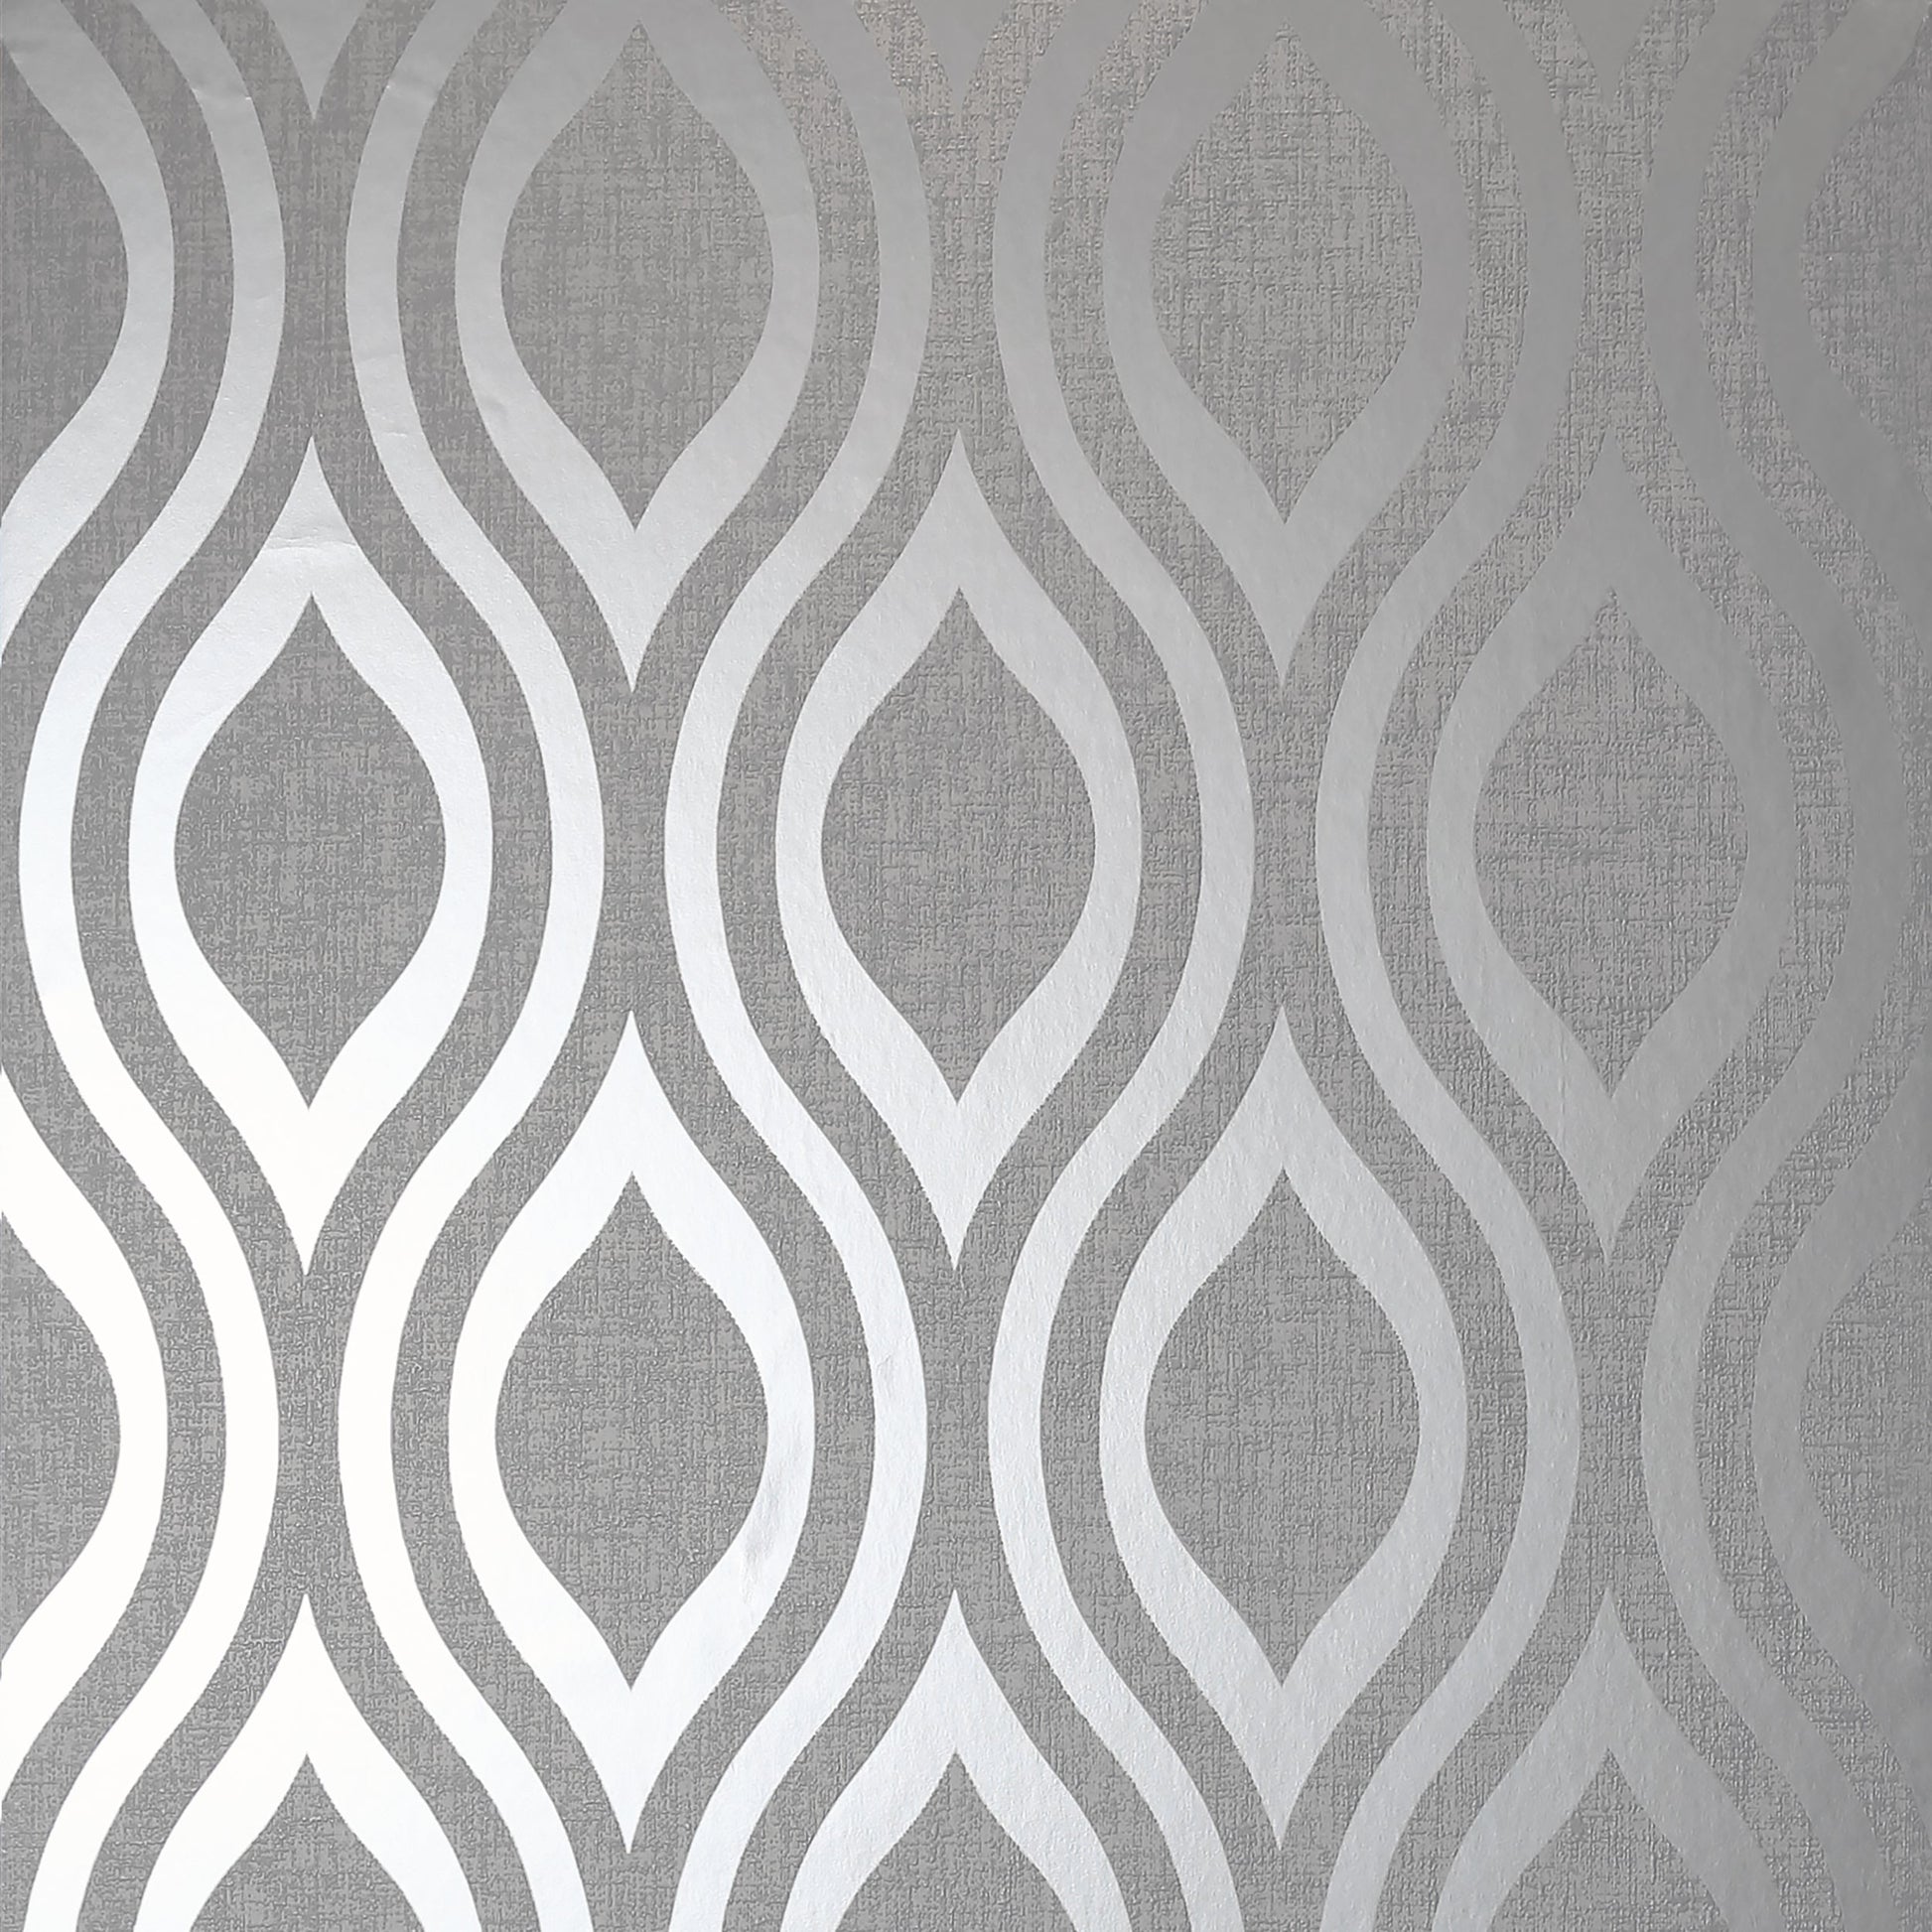 Luxe Ogee Wallpaper 910204 by Arthouse